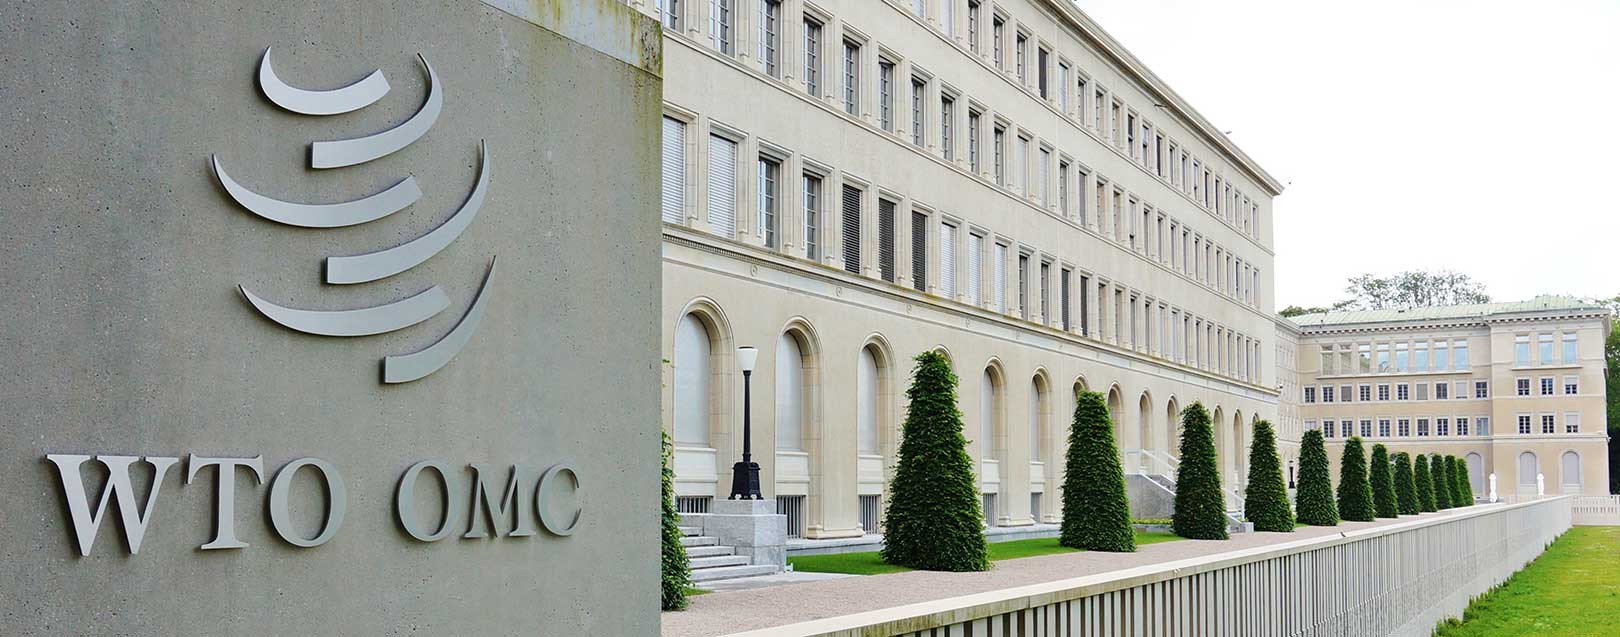 WTO mini-ministerial: Trade ministers to meet in Oslo in Oct